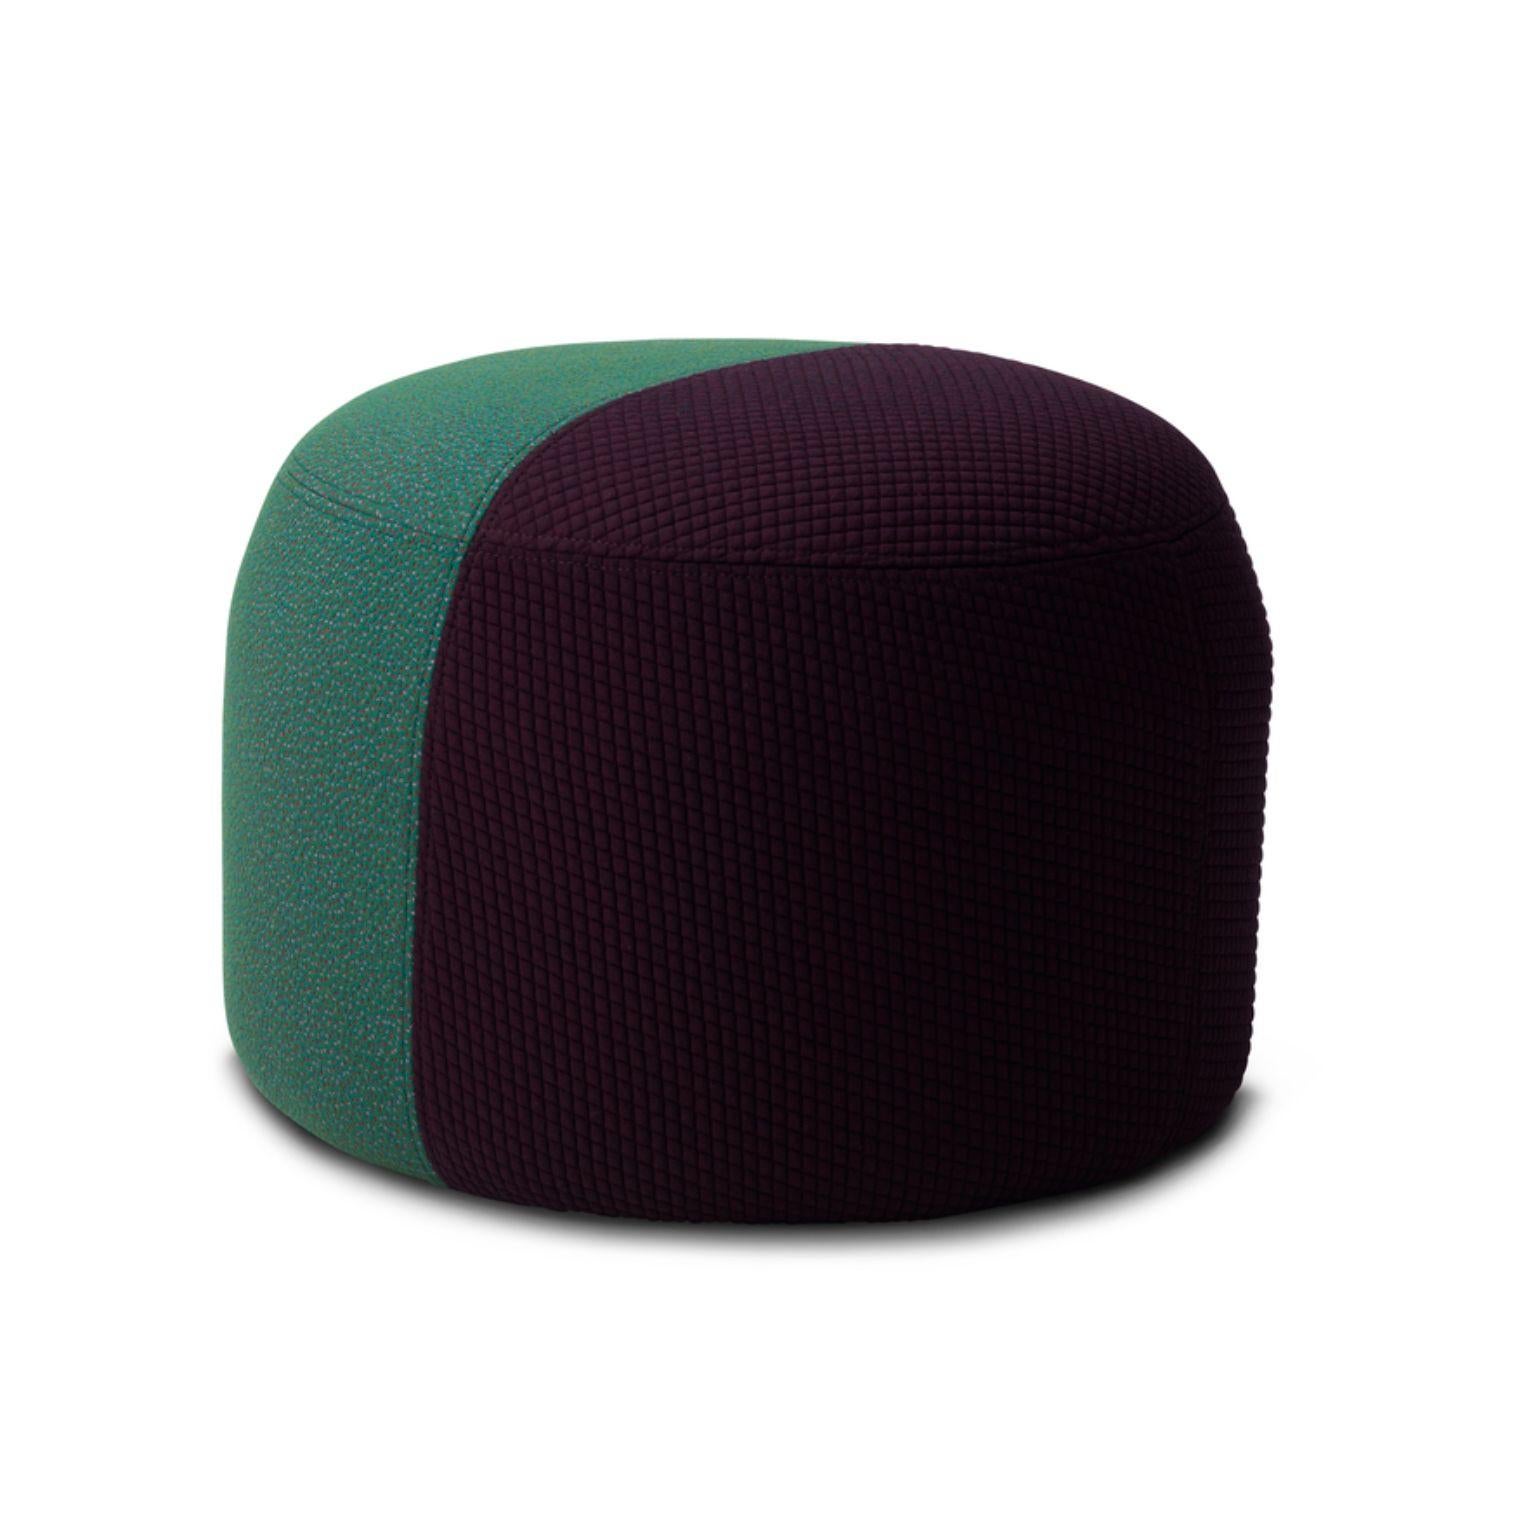 Dainty pouf mosaic sprinkles bordeaux hunter green by Warm Nordic
Dimensions: D55 x H 39 cm
Material: Textile upholstery, Wooden frame, foam.
Weight: 9.5 kg
Also available in different colors and finishes.

Sophisticated, two-coloured pouf